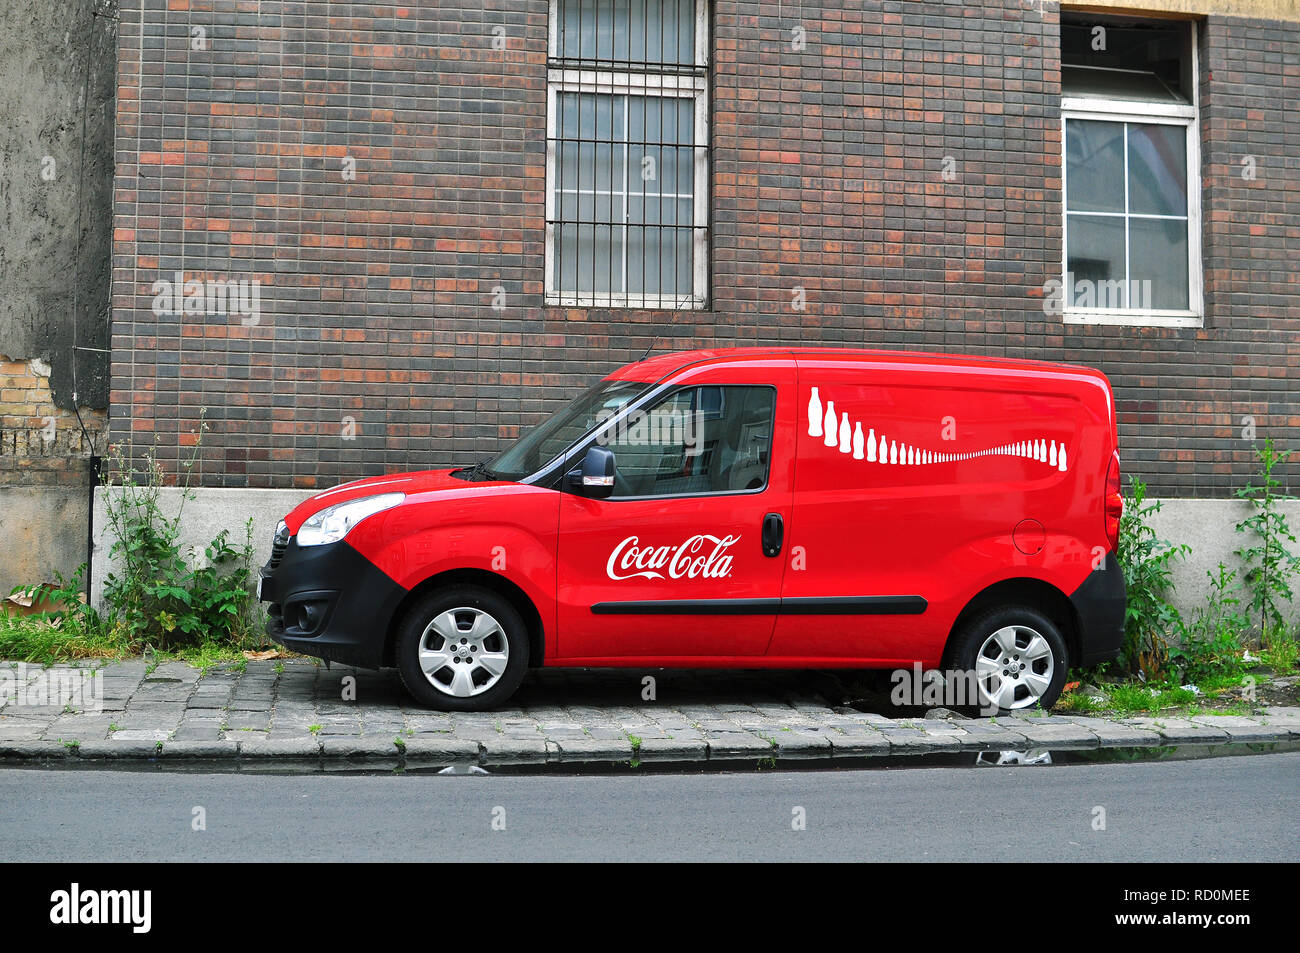 BUDAPEST, HUNGARY - MAY 30: Coca-Cola branding van in the street of Budapest on May 30, 2016. Stock Photo